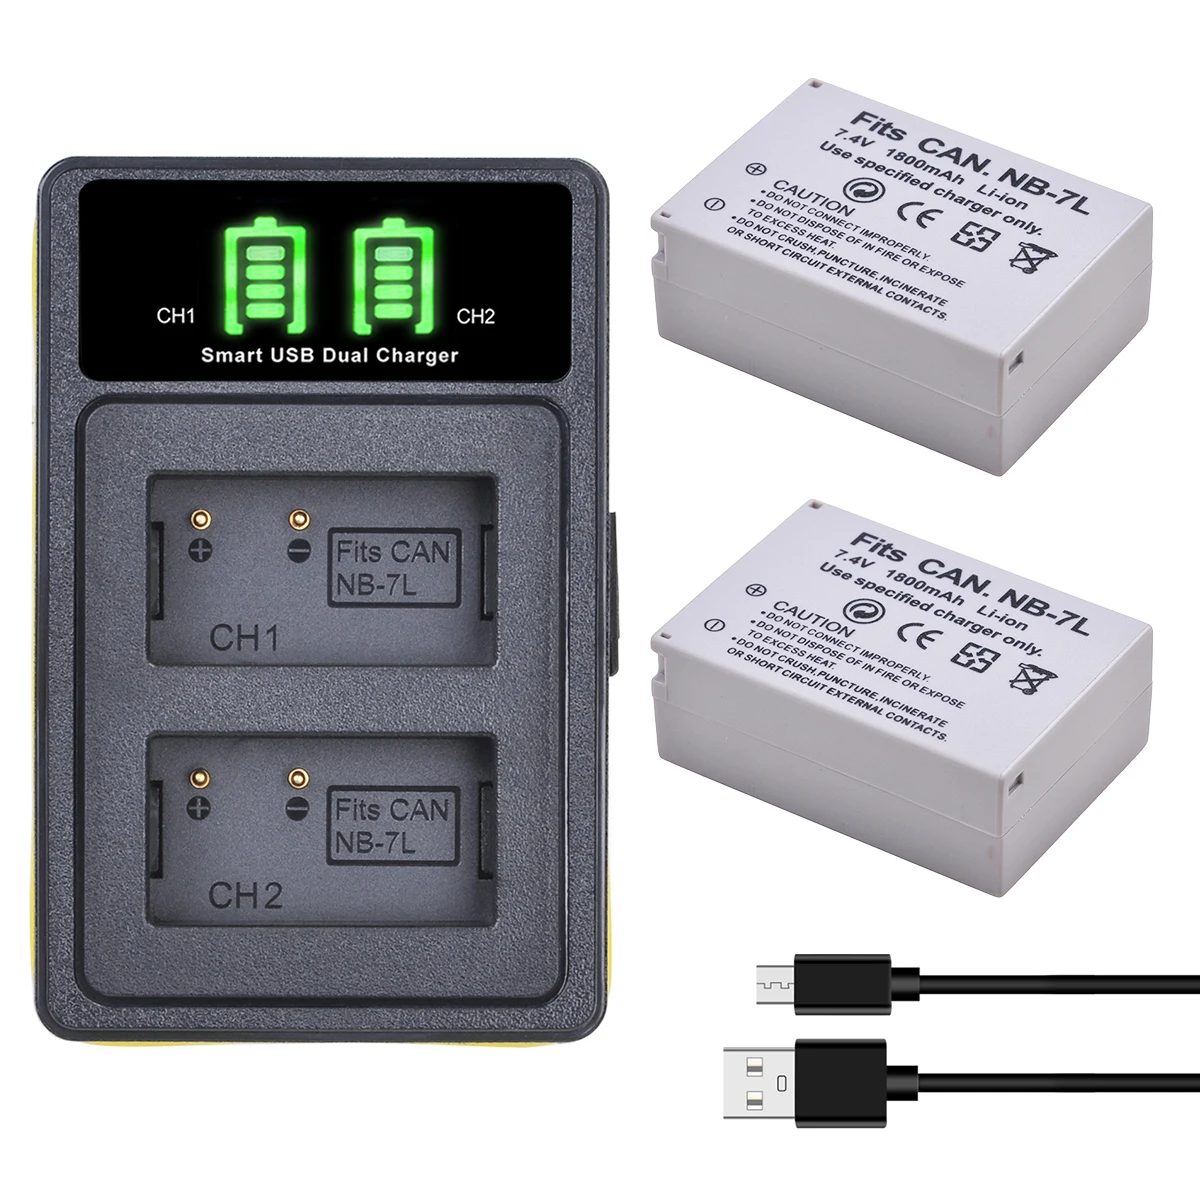 

7.4V 1800mAh NB-7L NB7L NB 7L Li-ion Battery +LED Dual USB Charger for Canon PowerShot G10 G11 G12 SX30 SX30IS Digital Camera